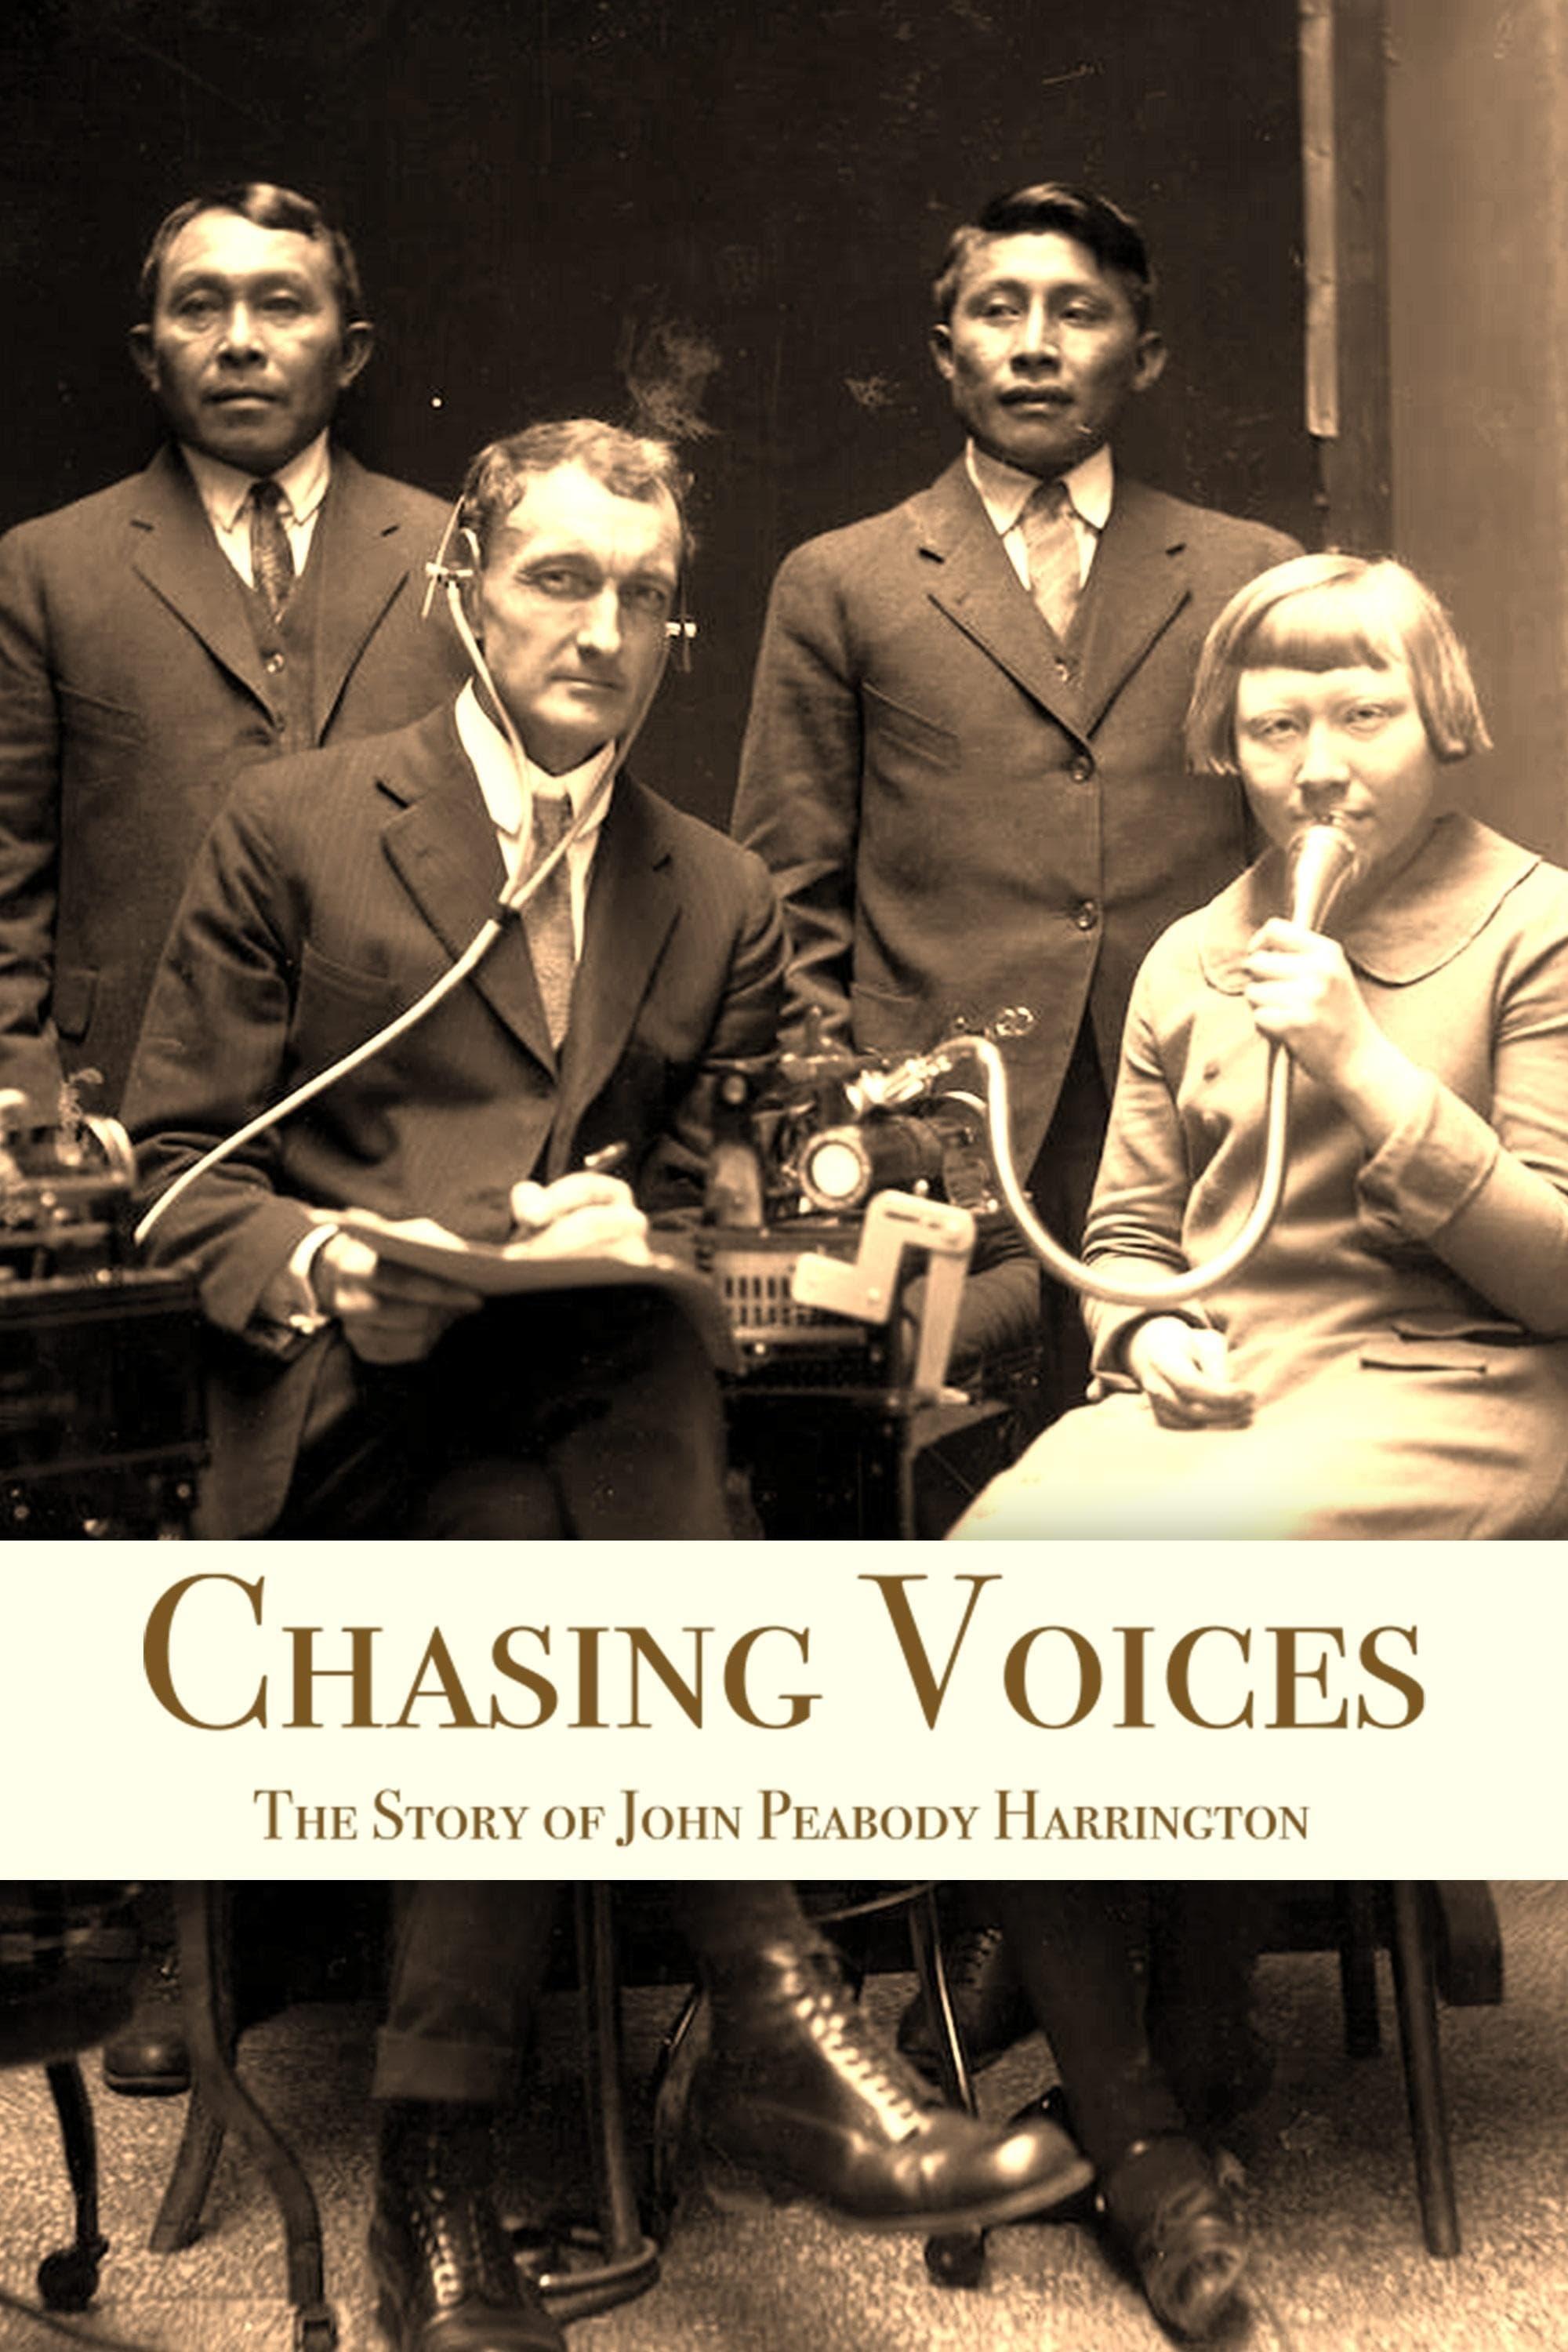 Chasing Voices: The Story of John Peabody Harrington poster